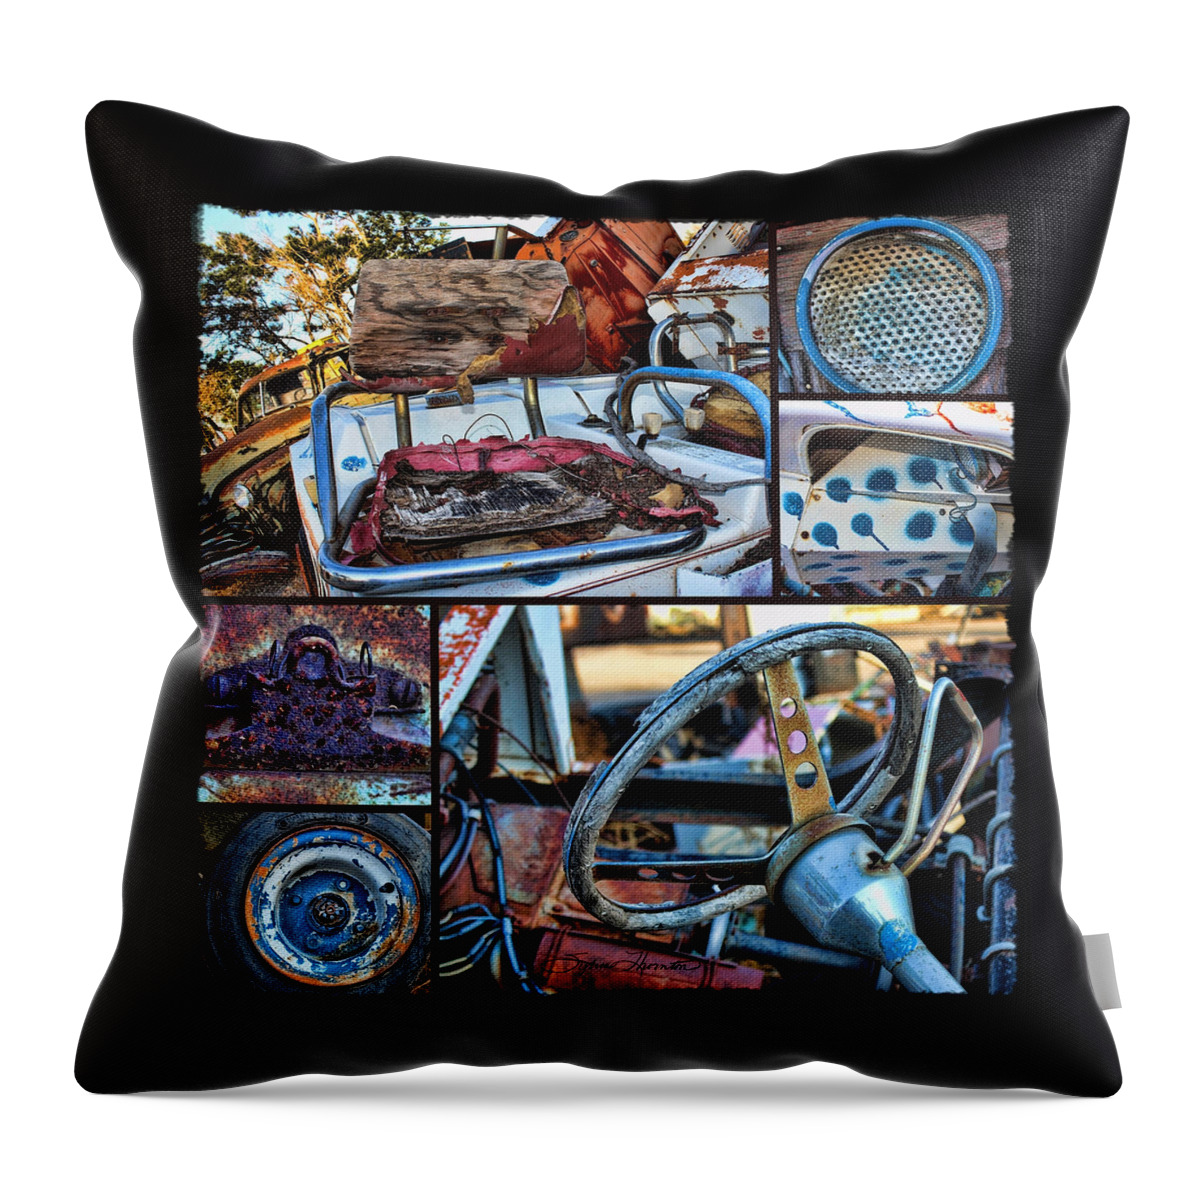 Collage Throw Pillow featuring the photograph Golf Cart Collage by Sylvia Thornton